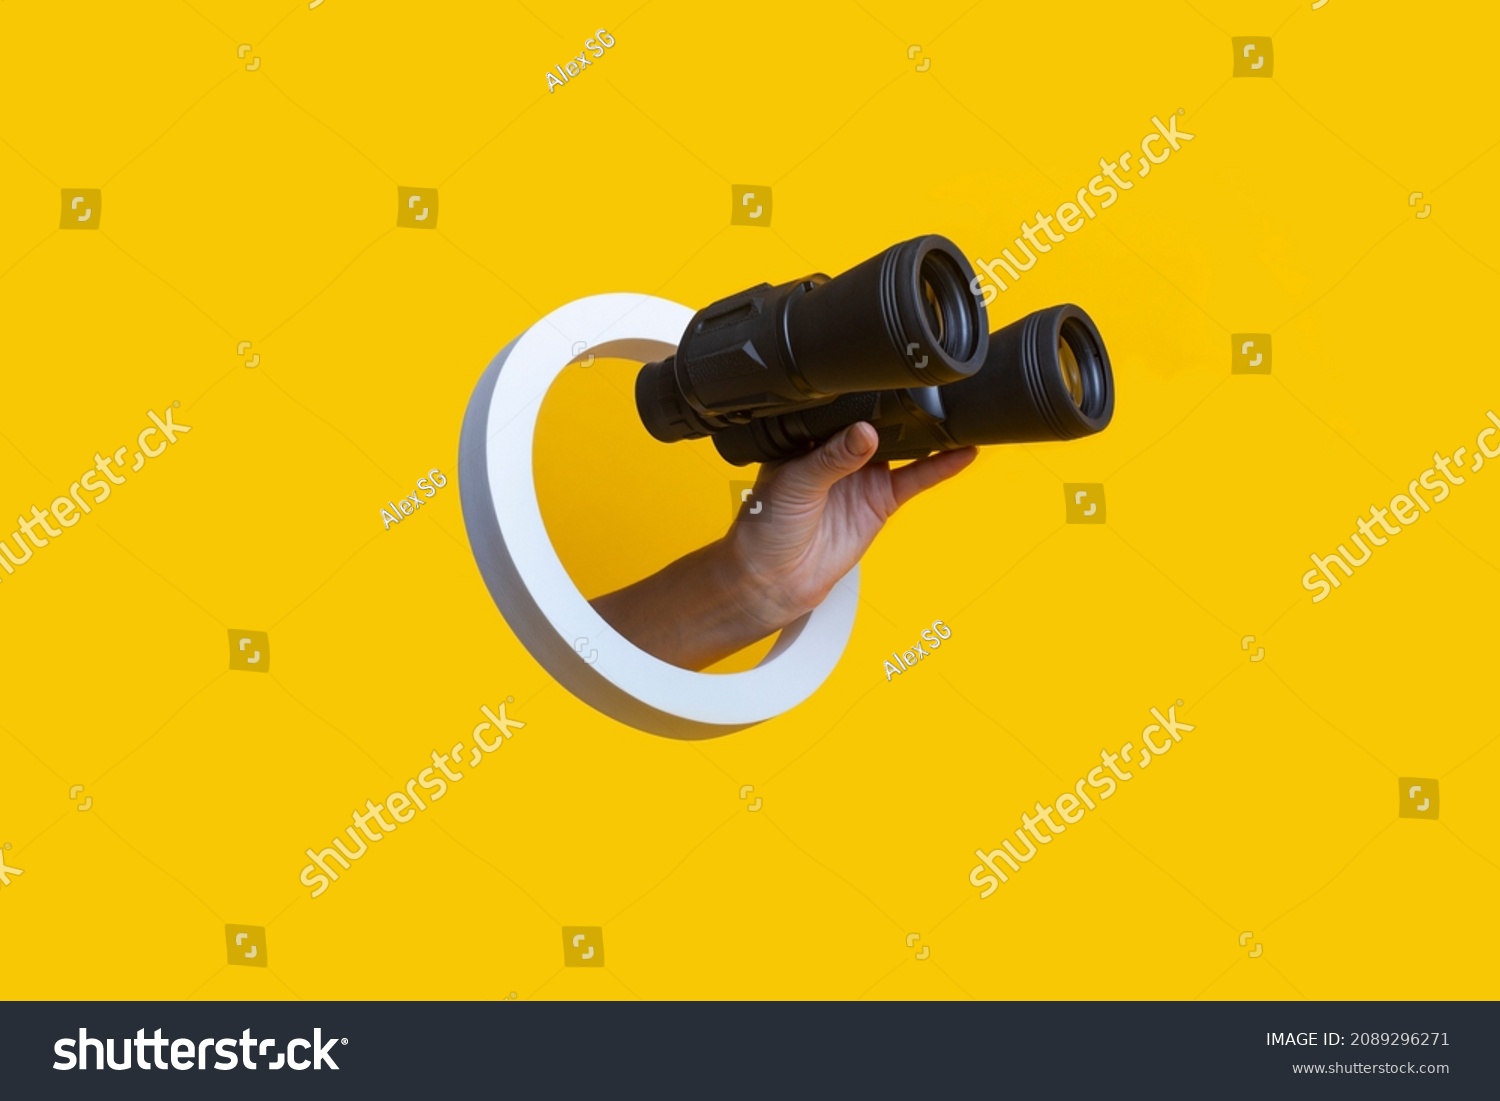 Woman's hand holding binoculars in a hole on a yellow background  #2089296271